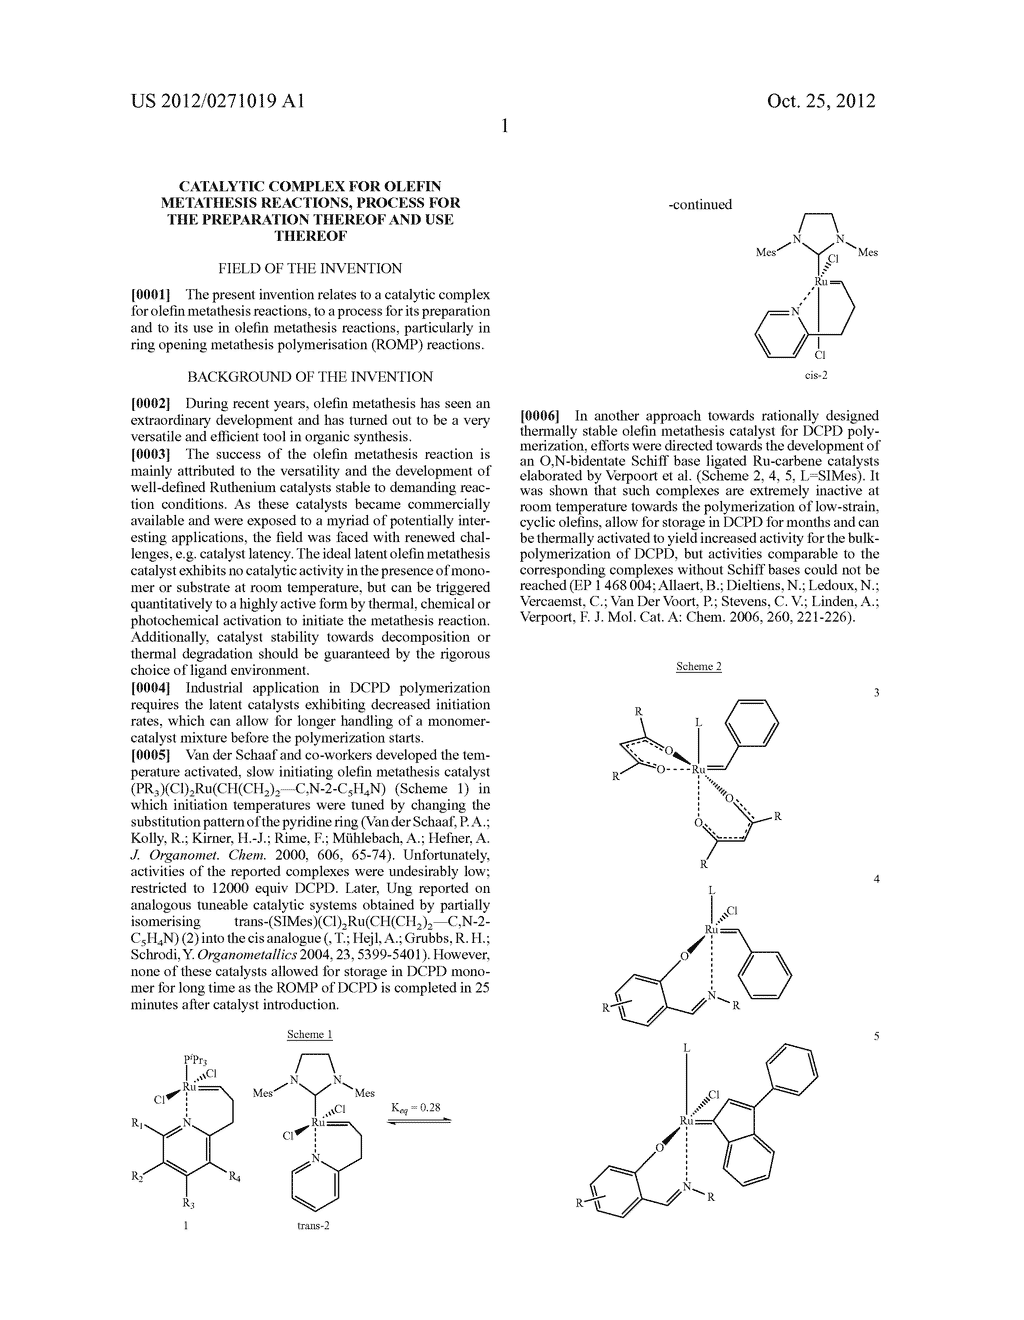 CATALYTIC COMPLEX FOR OLEFIN METATHESIS REACTIONS, PROCESS FOR THE     PREPARATION THEREOF AND USE THEREOF - diagram, schematic, and image 02